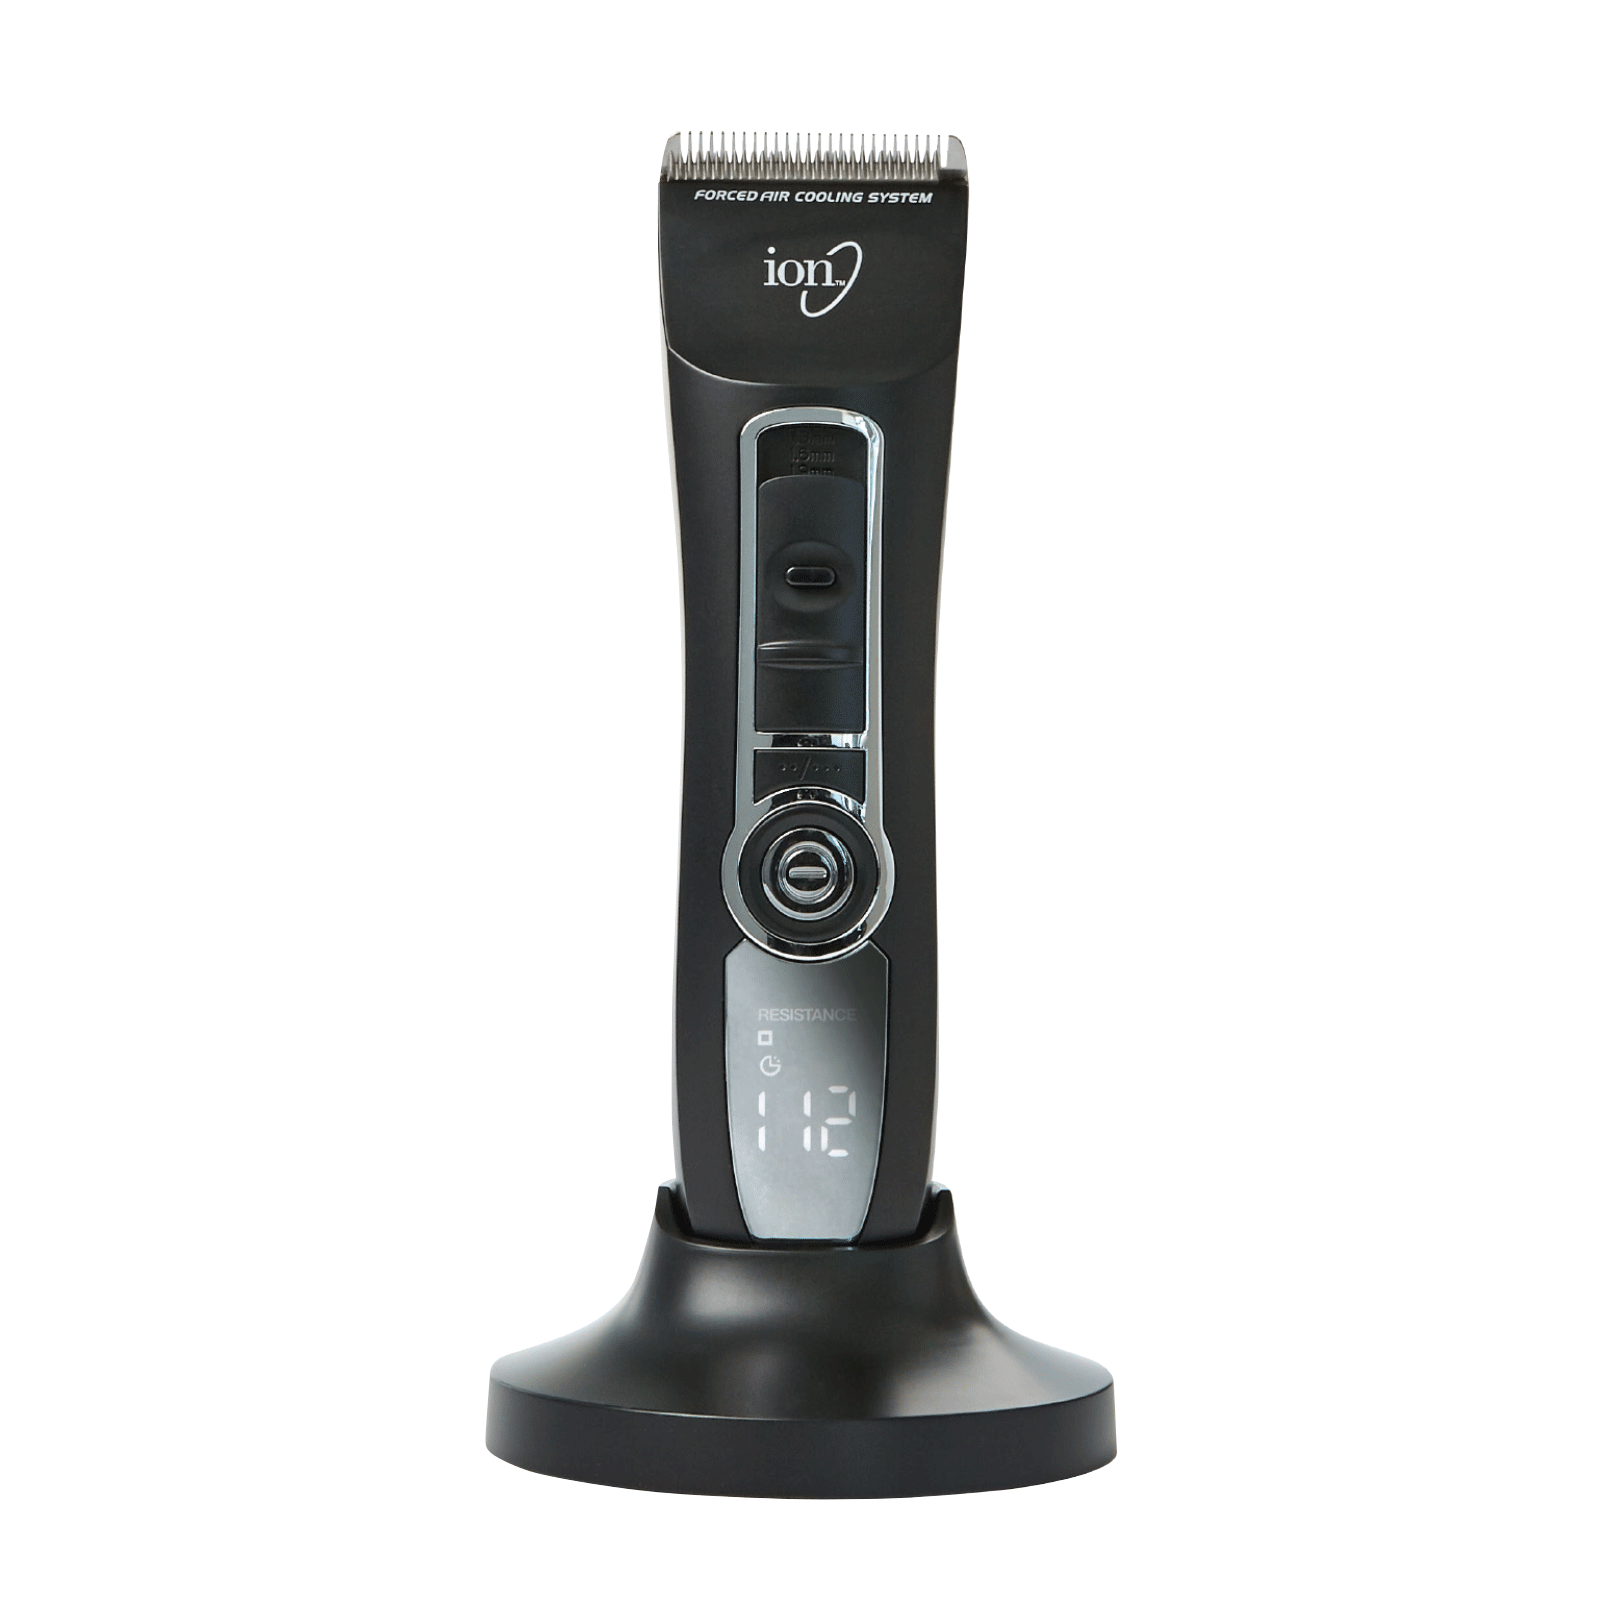 philips norelco beard and head trimmer series 5100